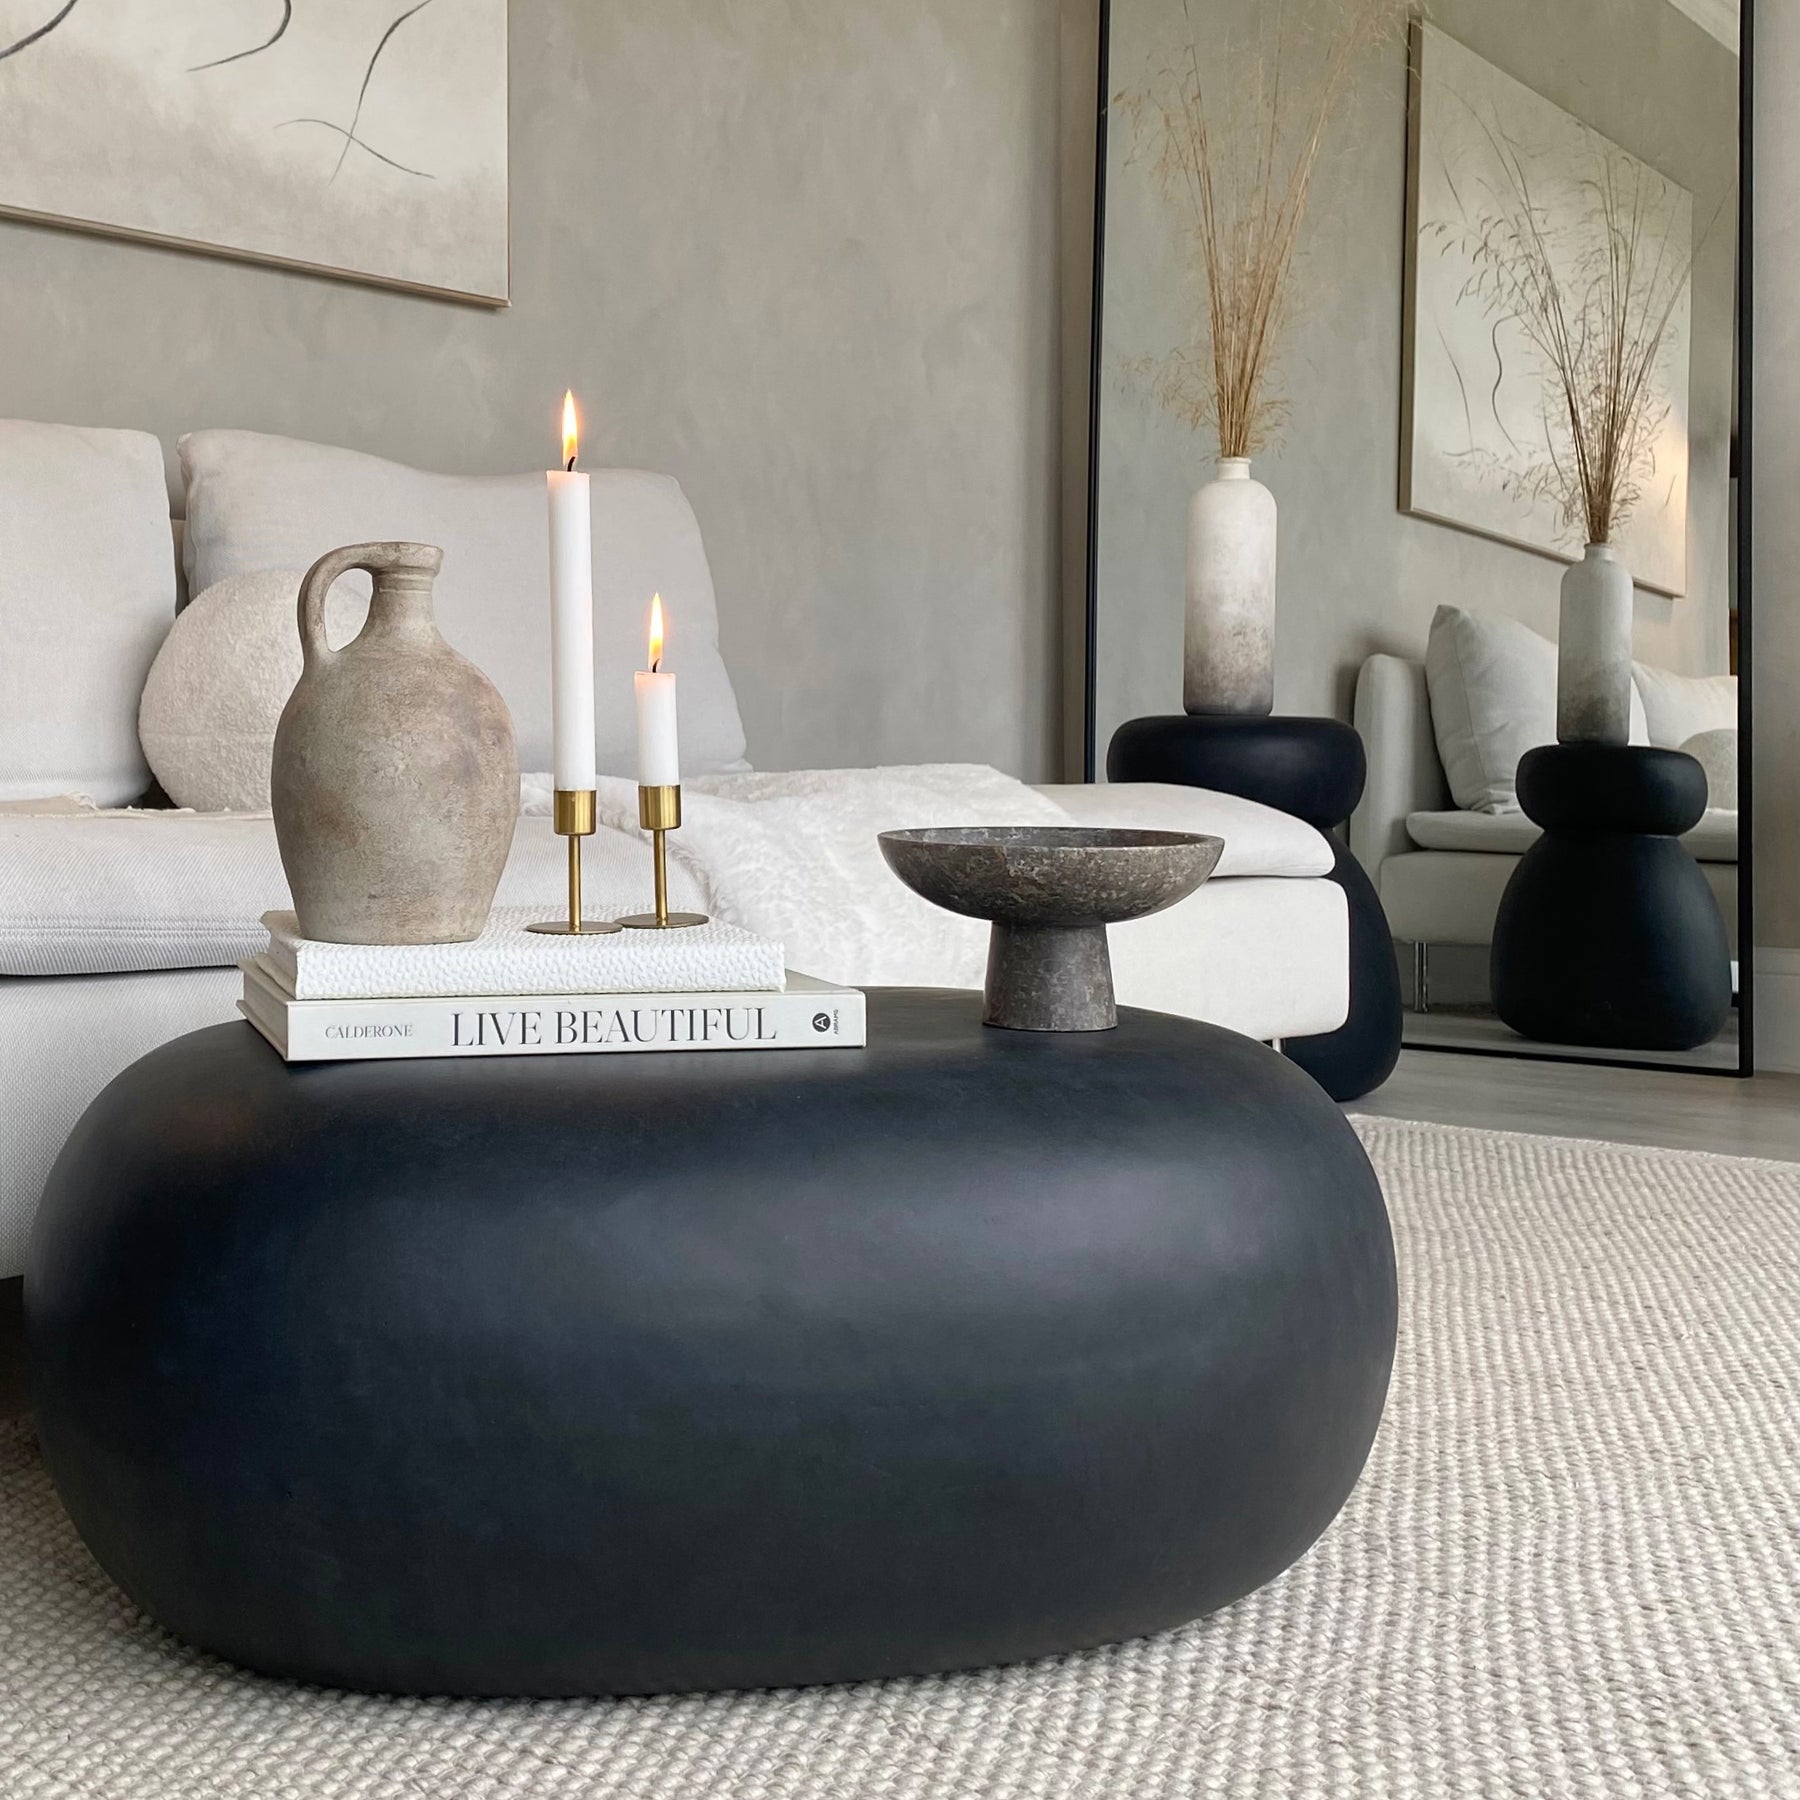 Minimal Onyx Pebble Coffee Table Large with candles